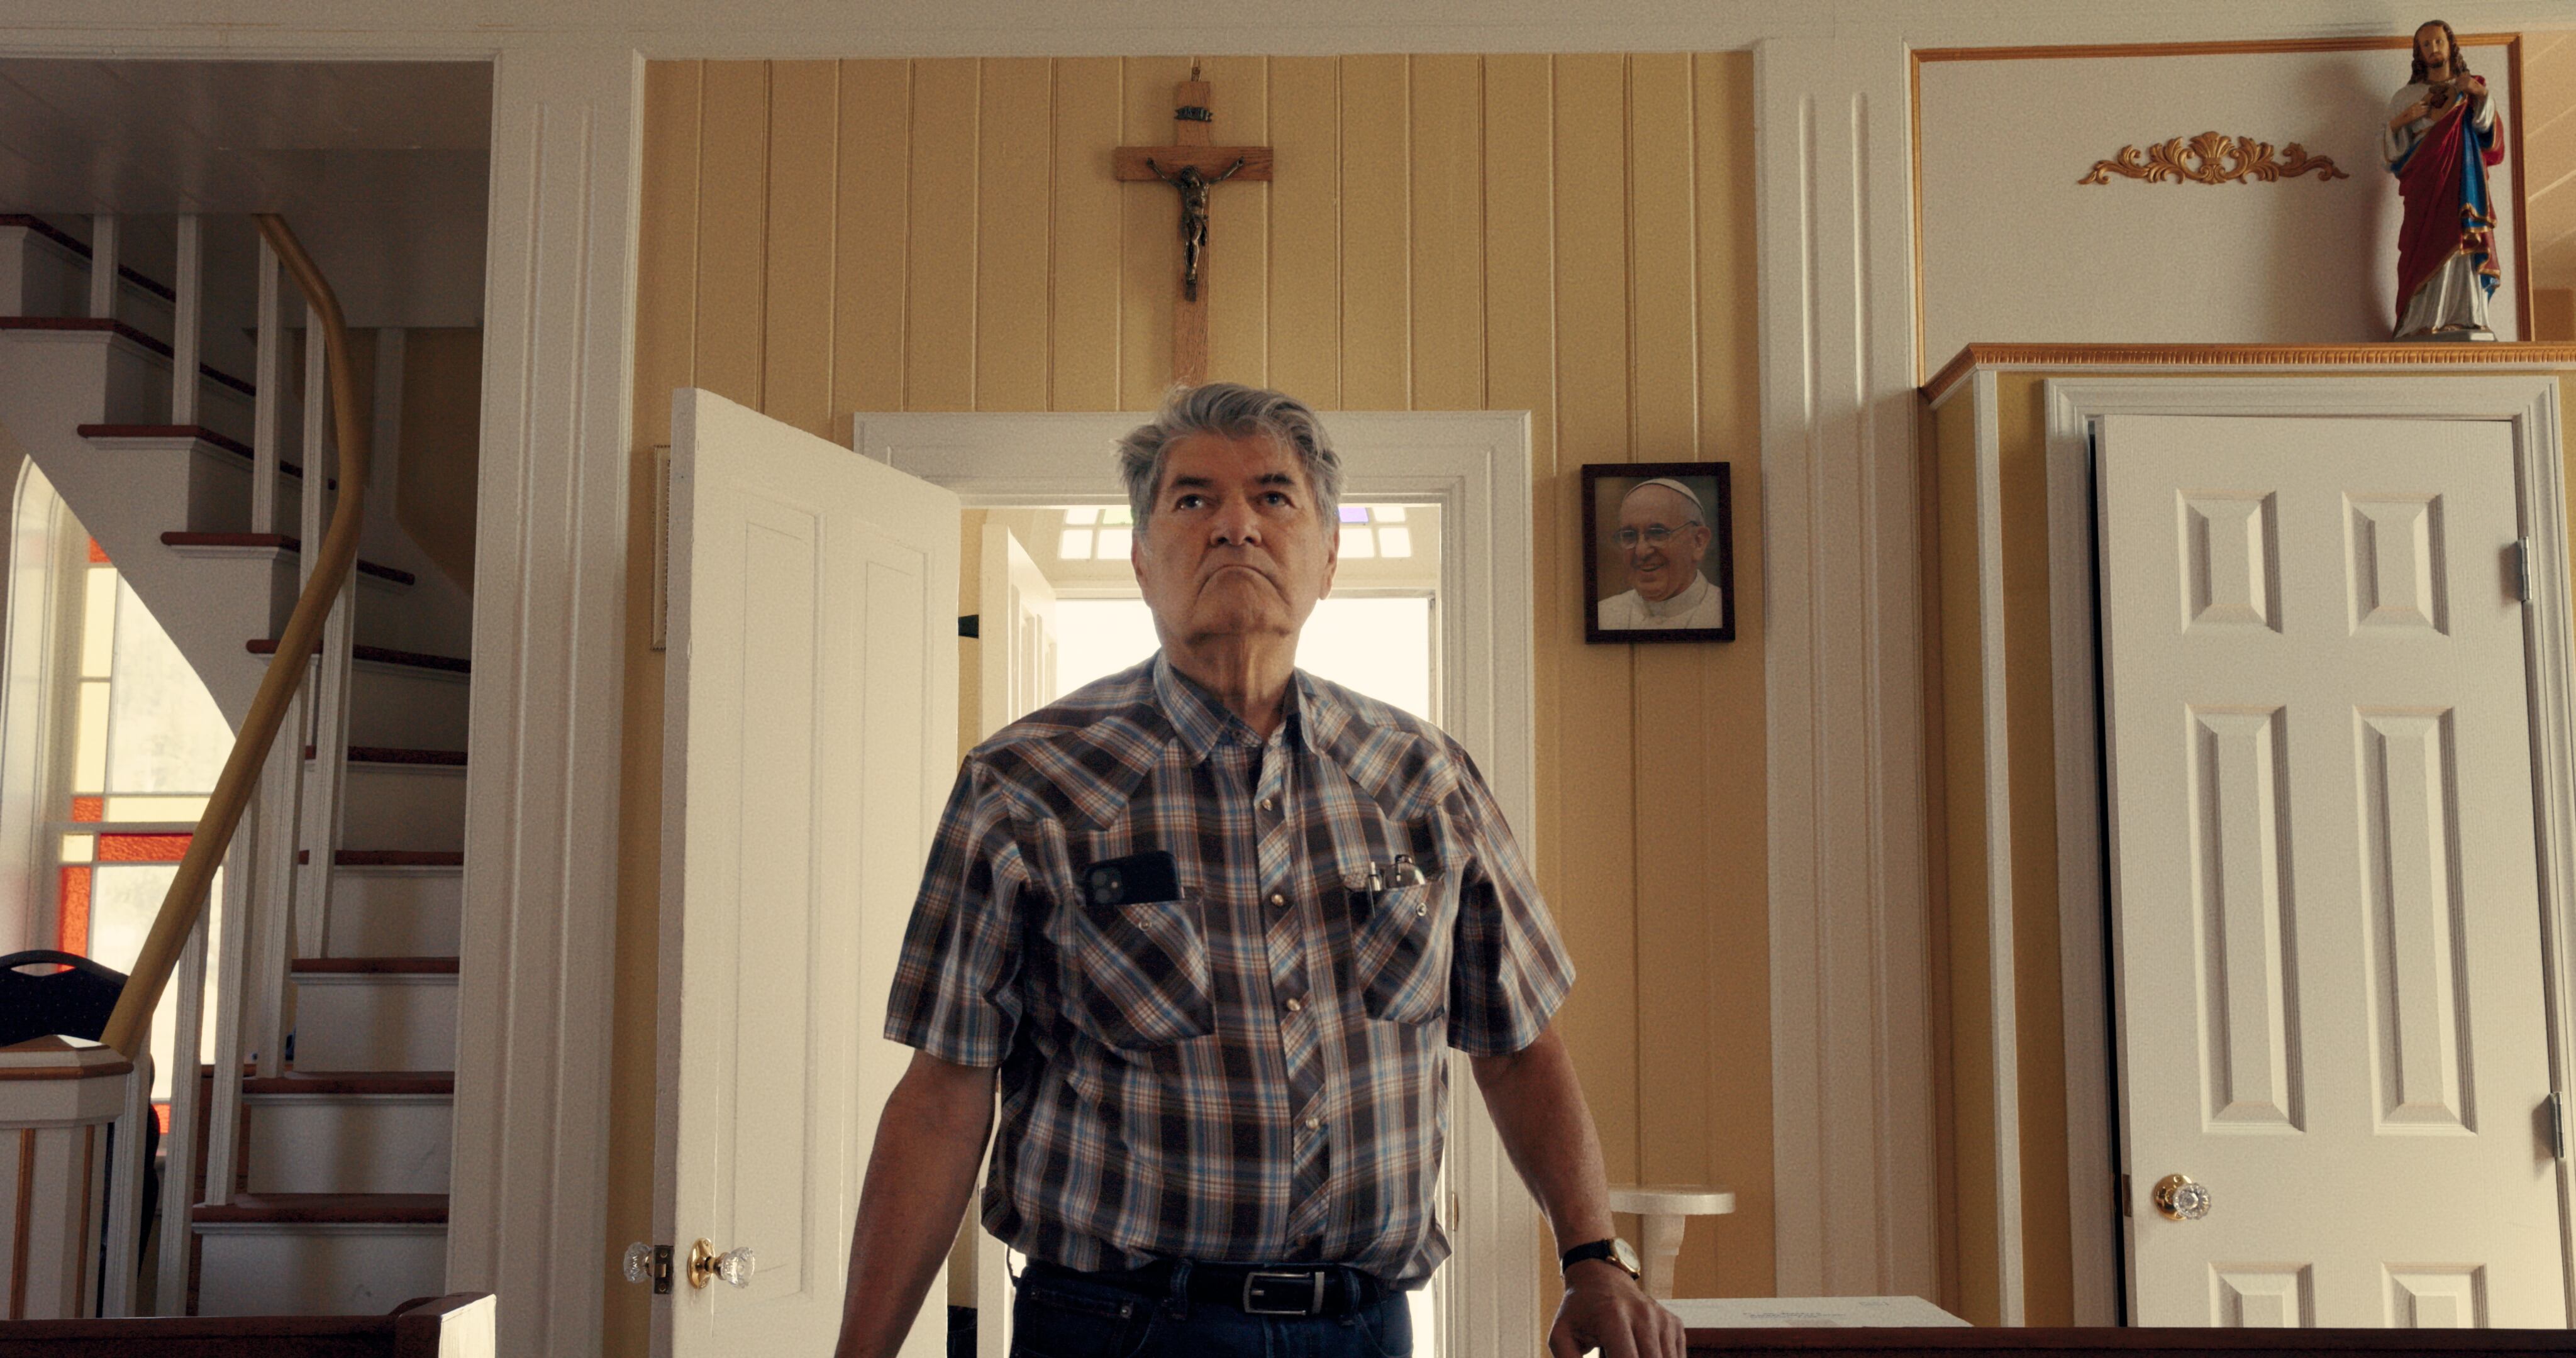 (Christopher LaMarca | National Geographic Documentary Films)
Rick Gilbert, former Chief of the Williams Lake First Nation, in the church on the Sugarcane Indian Reserve, in a moment from the documentary "Sugarcane."